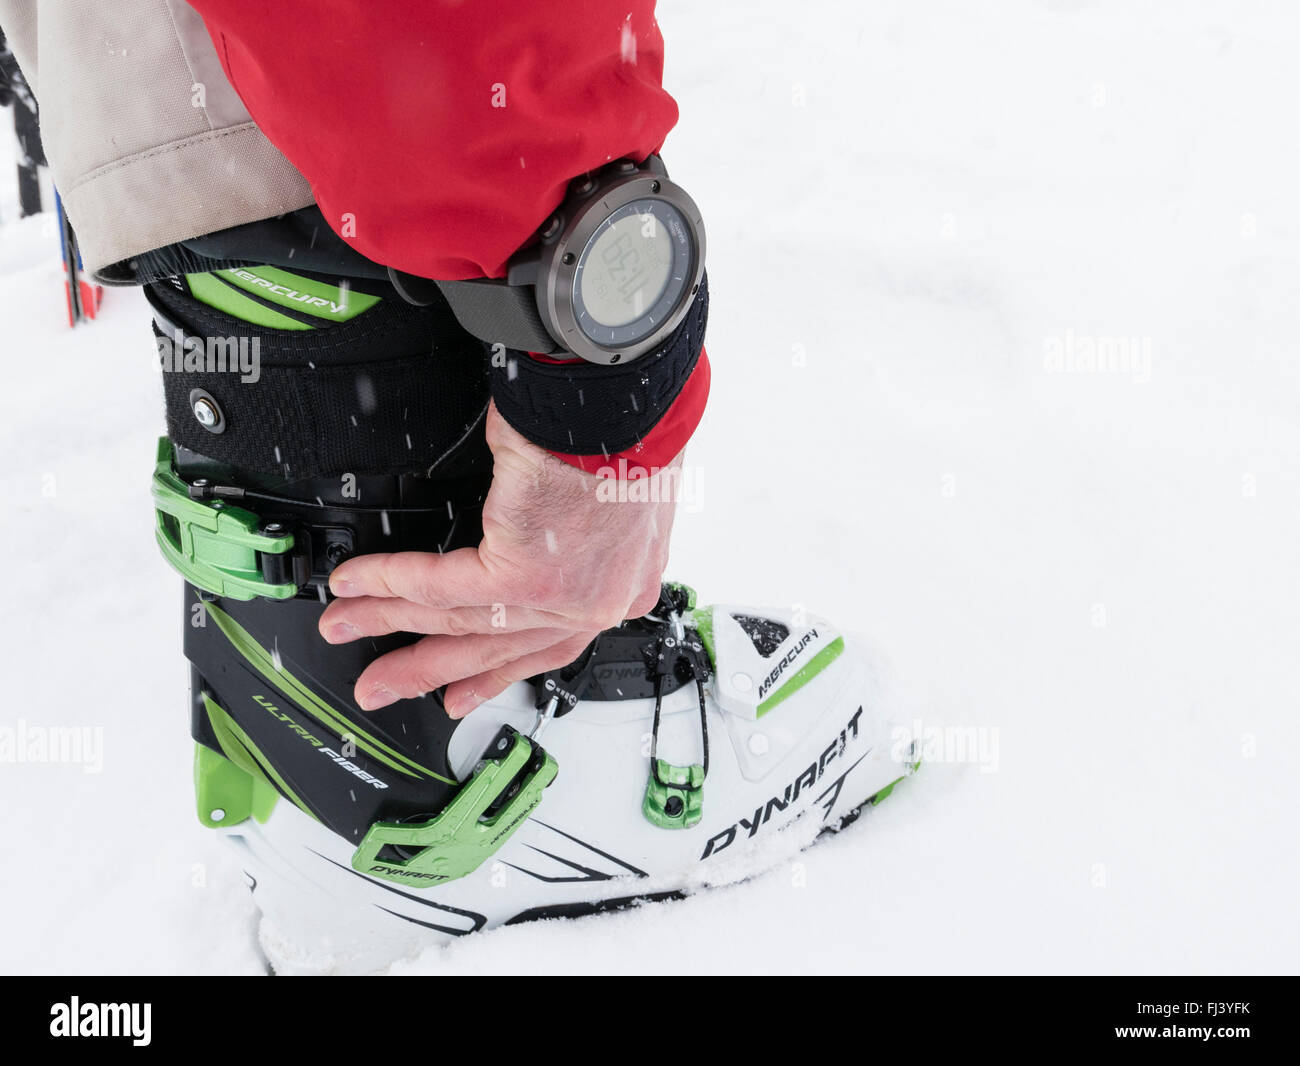 Skier adjusting Dynafit alpine touring ski boots and wearing a Suunto GPS Watch device for backcountry skiing navigation. Alps Stock Photo